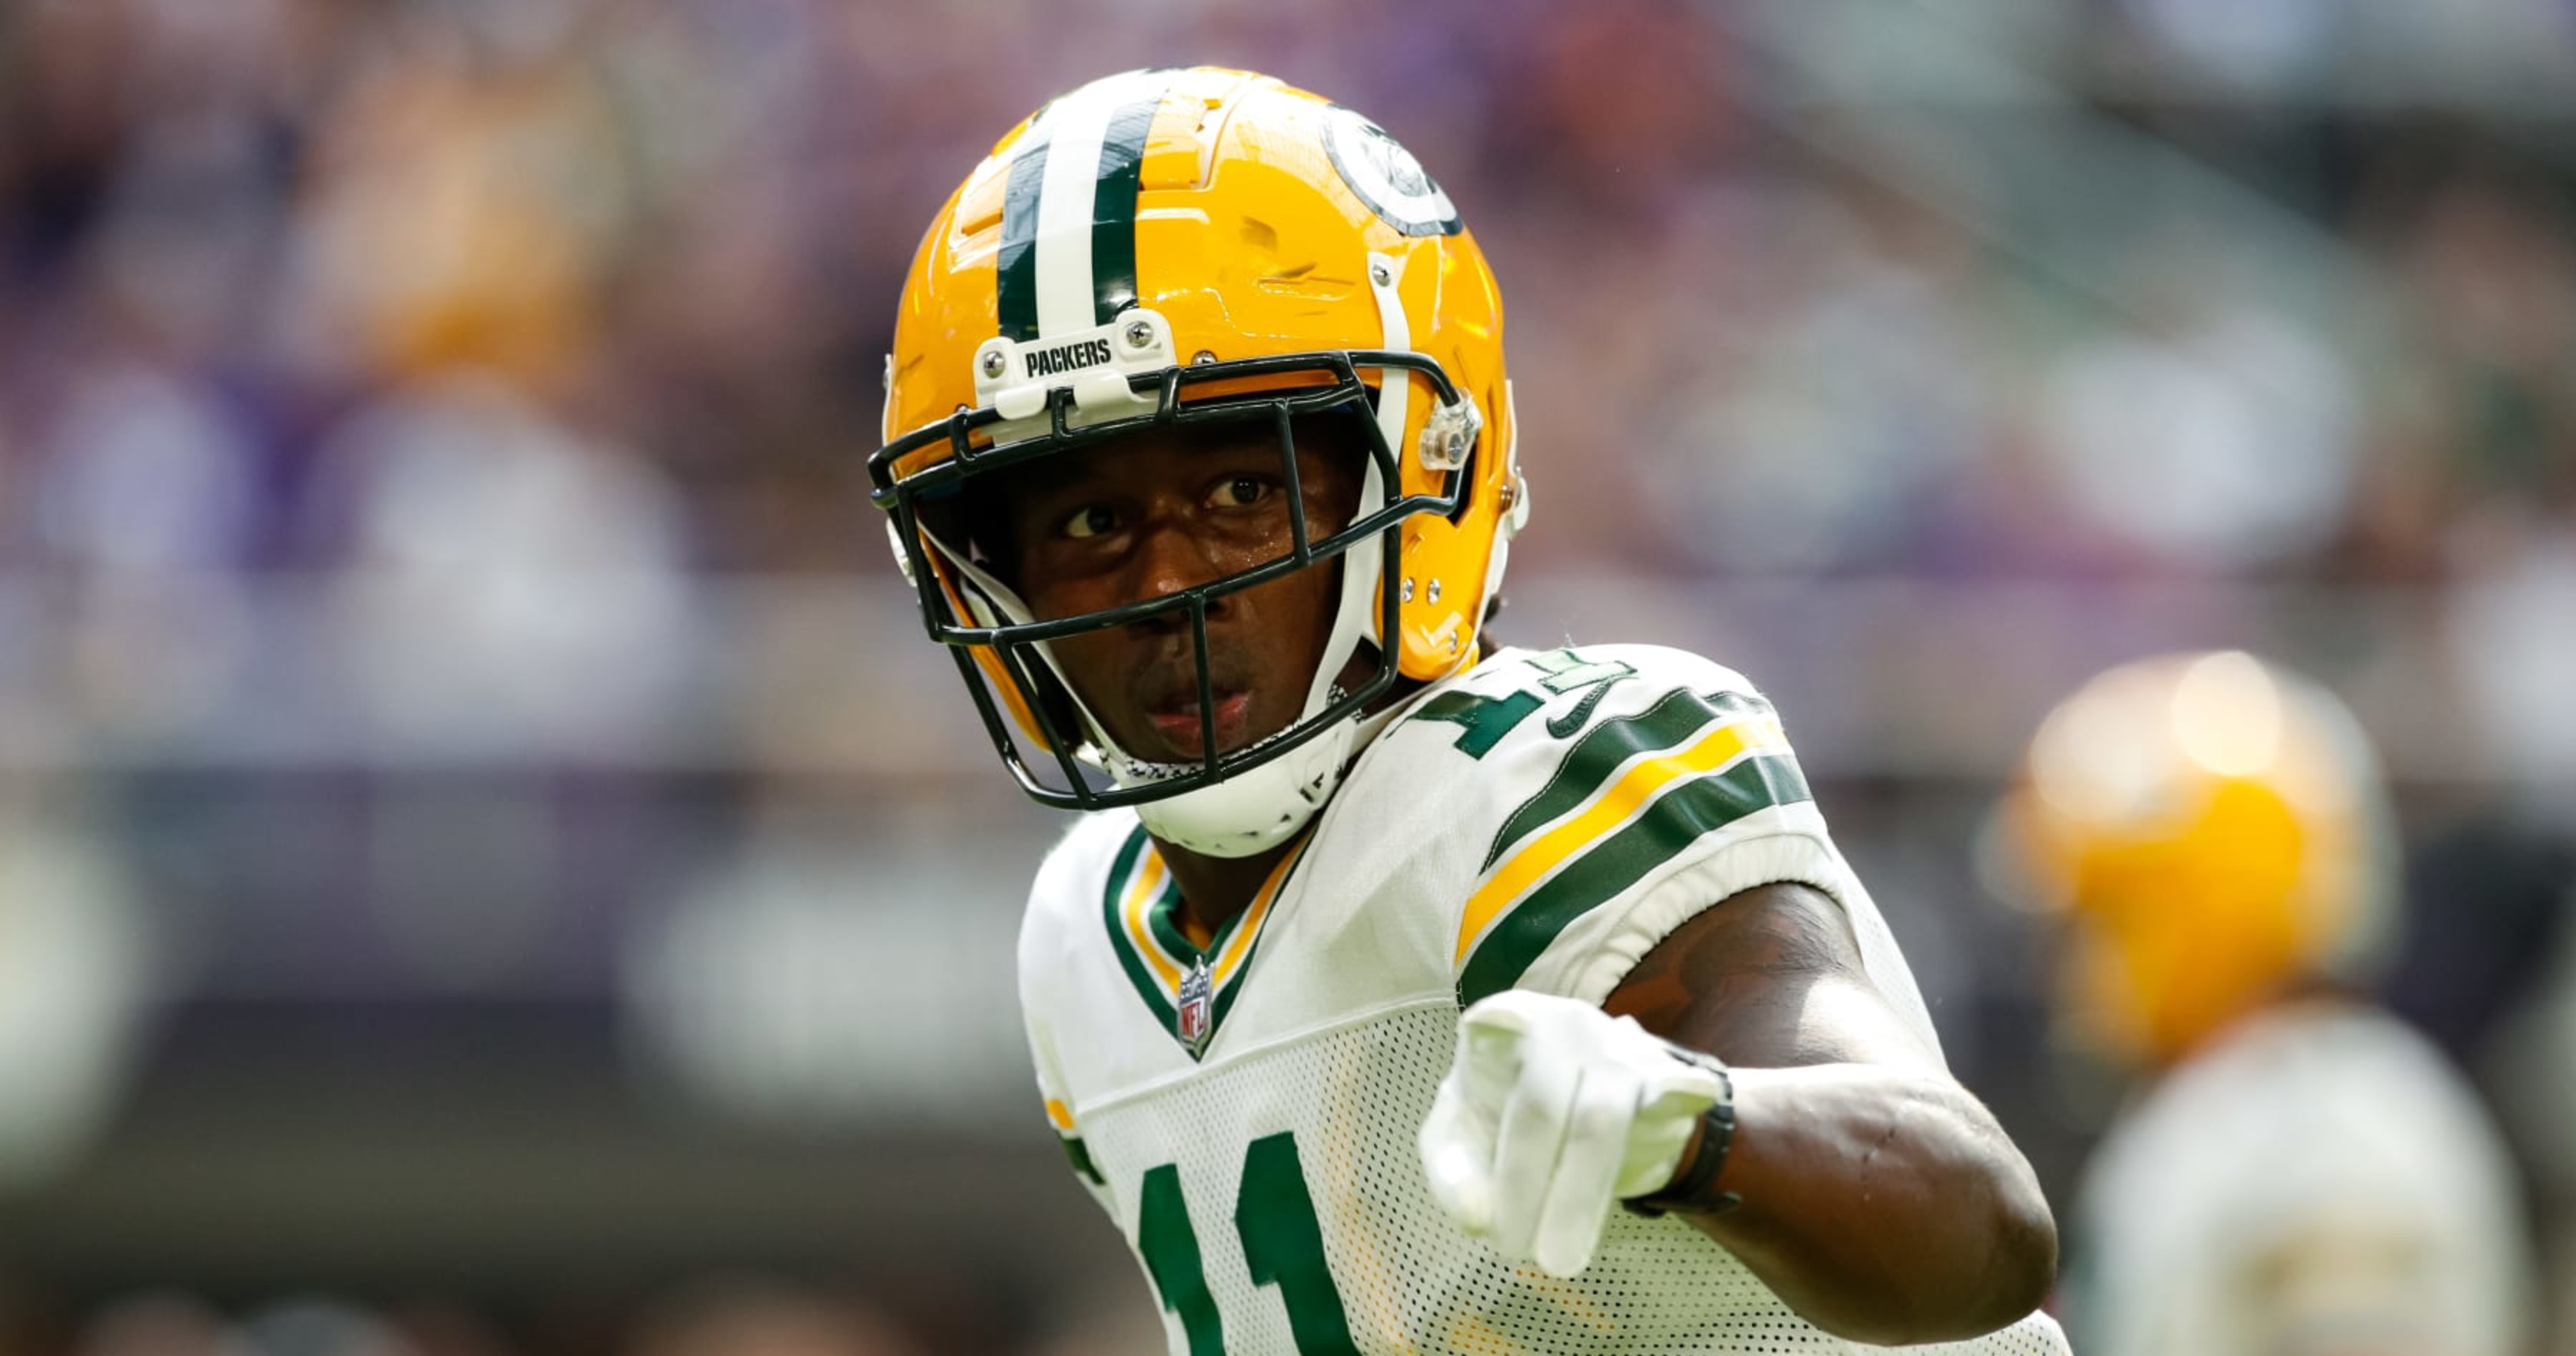 Packers' Sammy Watkins Placed on IR with Hamstring Injury